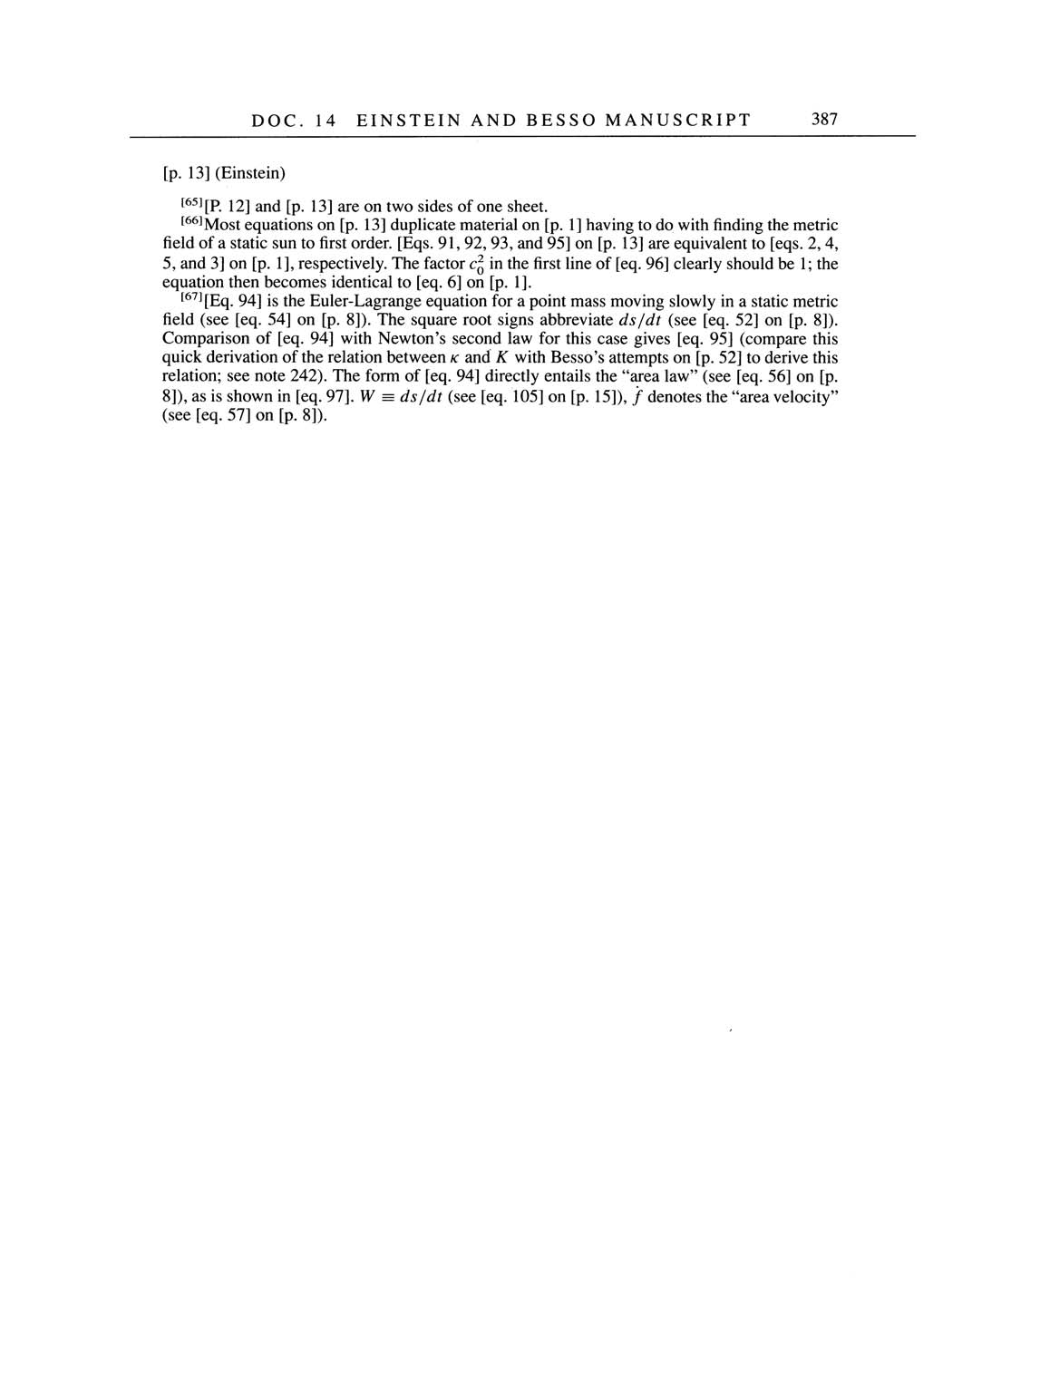 Volume 4: The Swiss Years: Writings 1912-1914 page 387